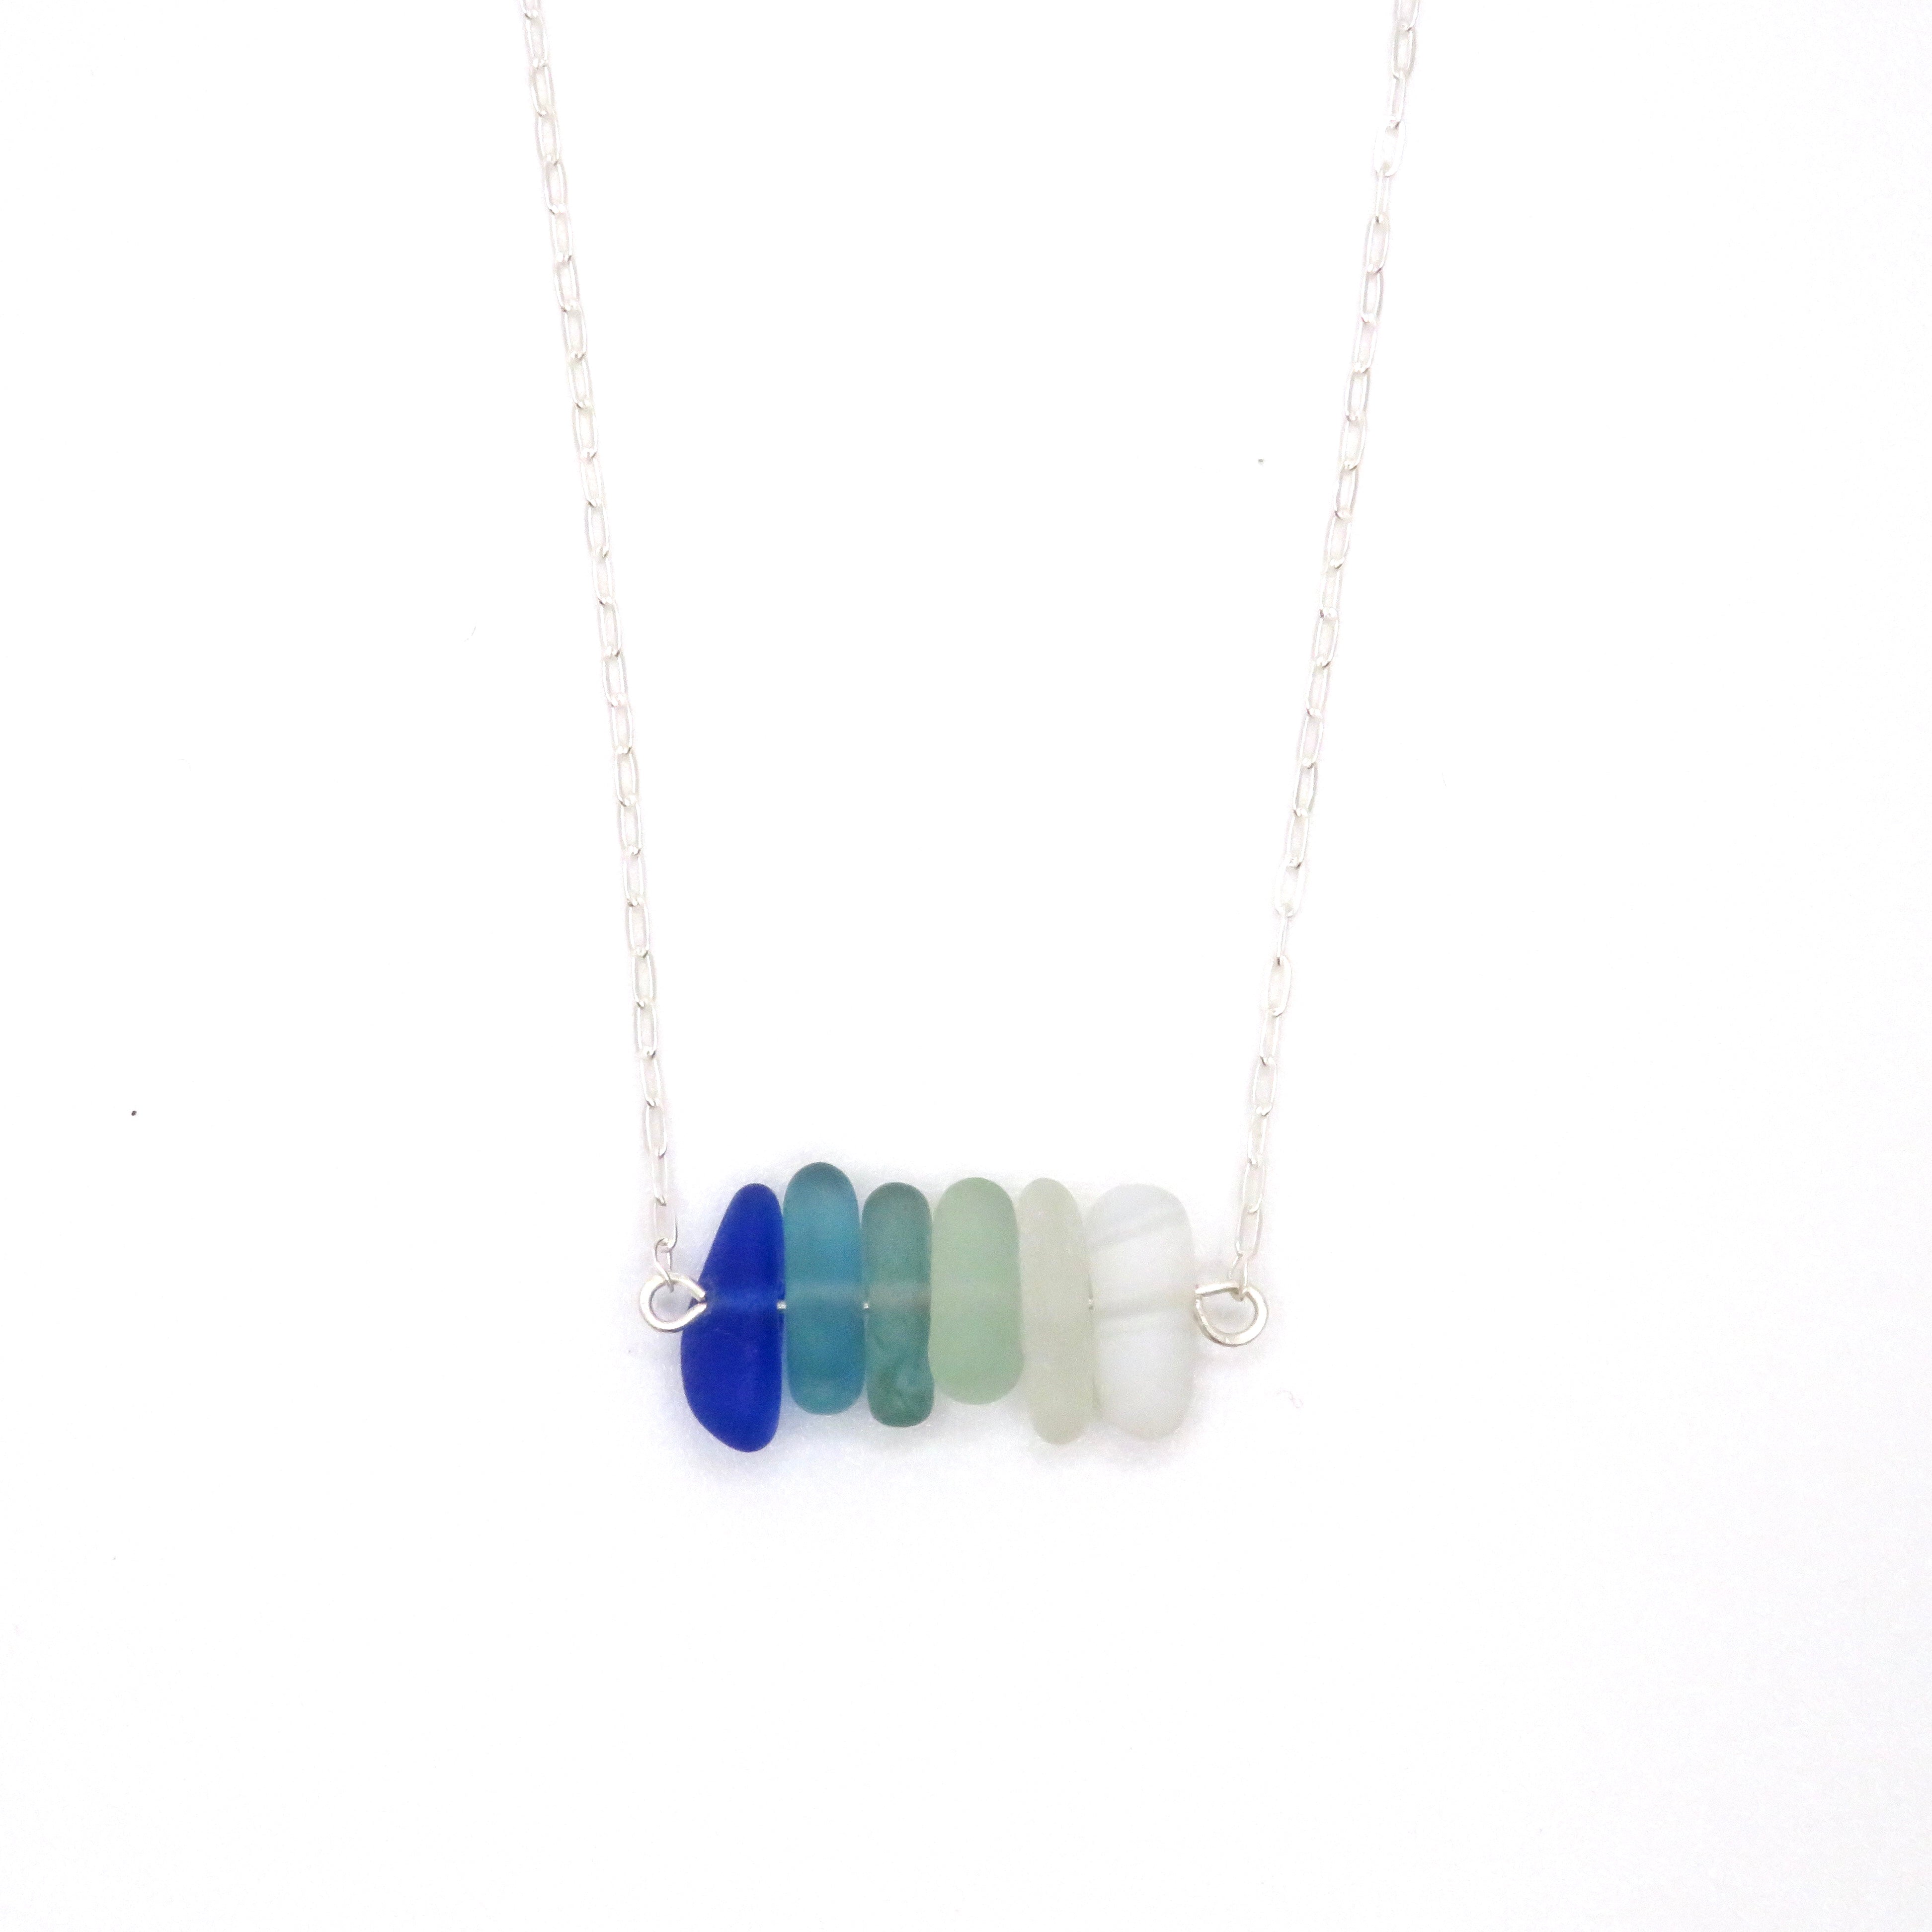 This Tiny Ocean Sea Glass Bar Necklaces